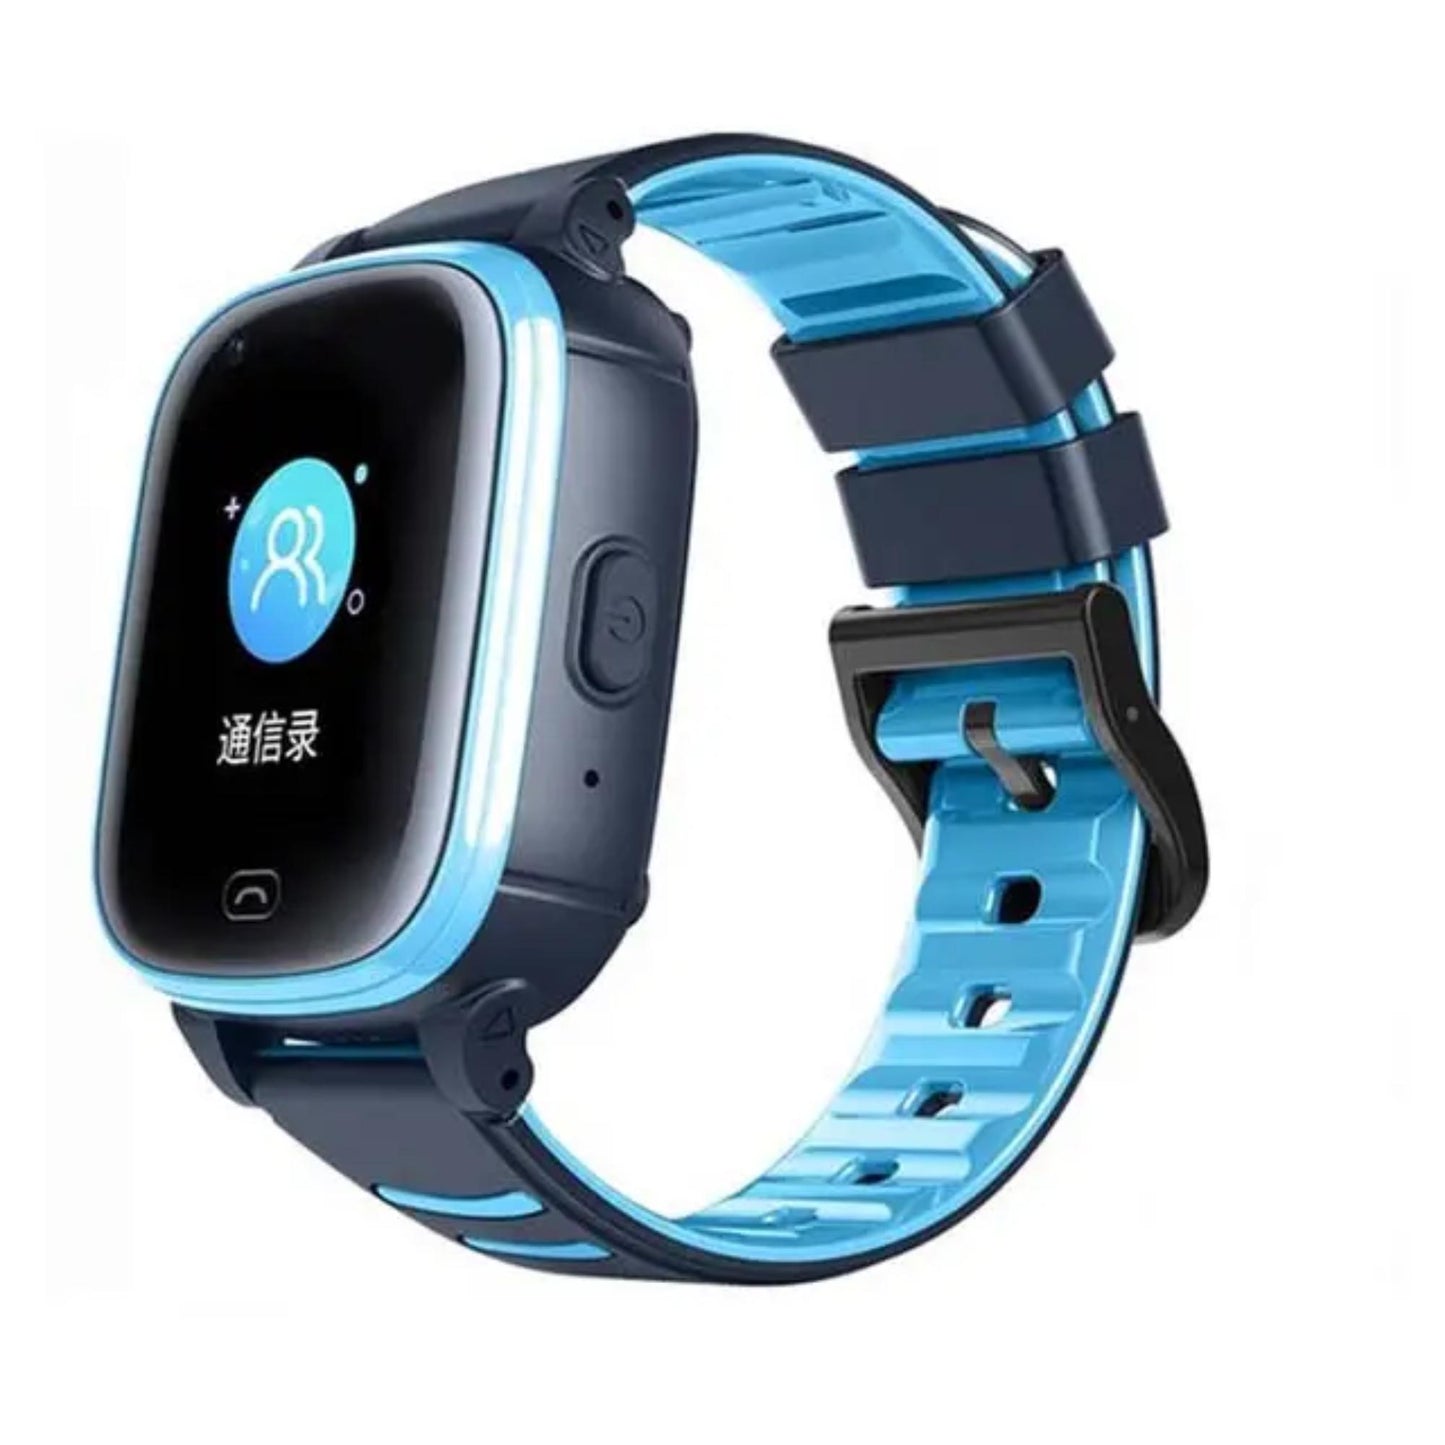 Lige A80 Kids Smartwatch with 1.4-inch IPS Screen, 700mAh Battery, HD Video Call, Fitness Tracker, Health Monitoring. | Blue Chilli Electronics.